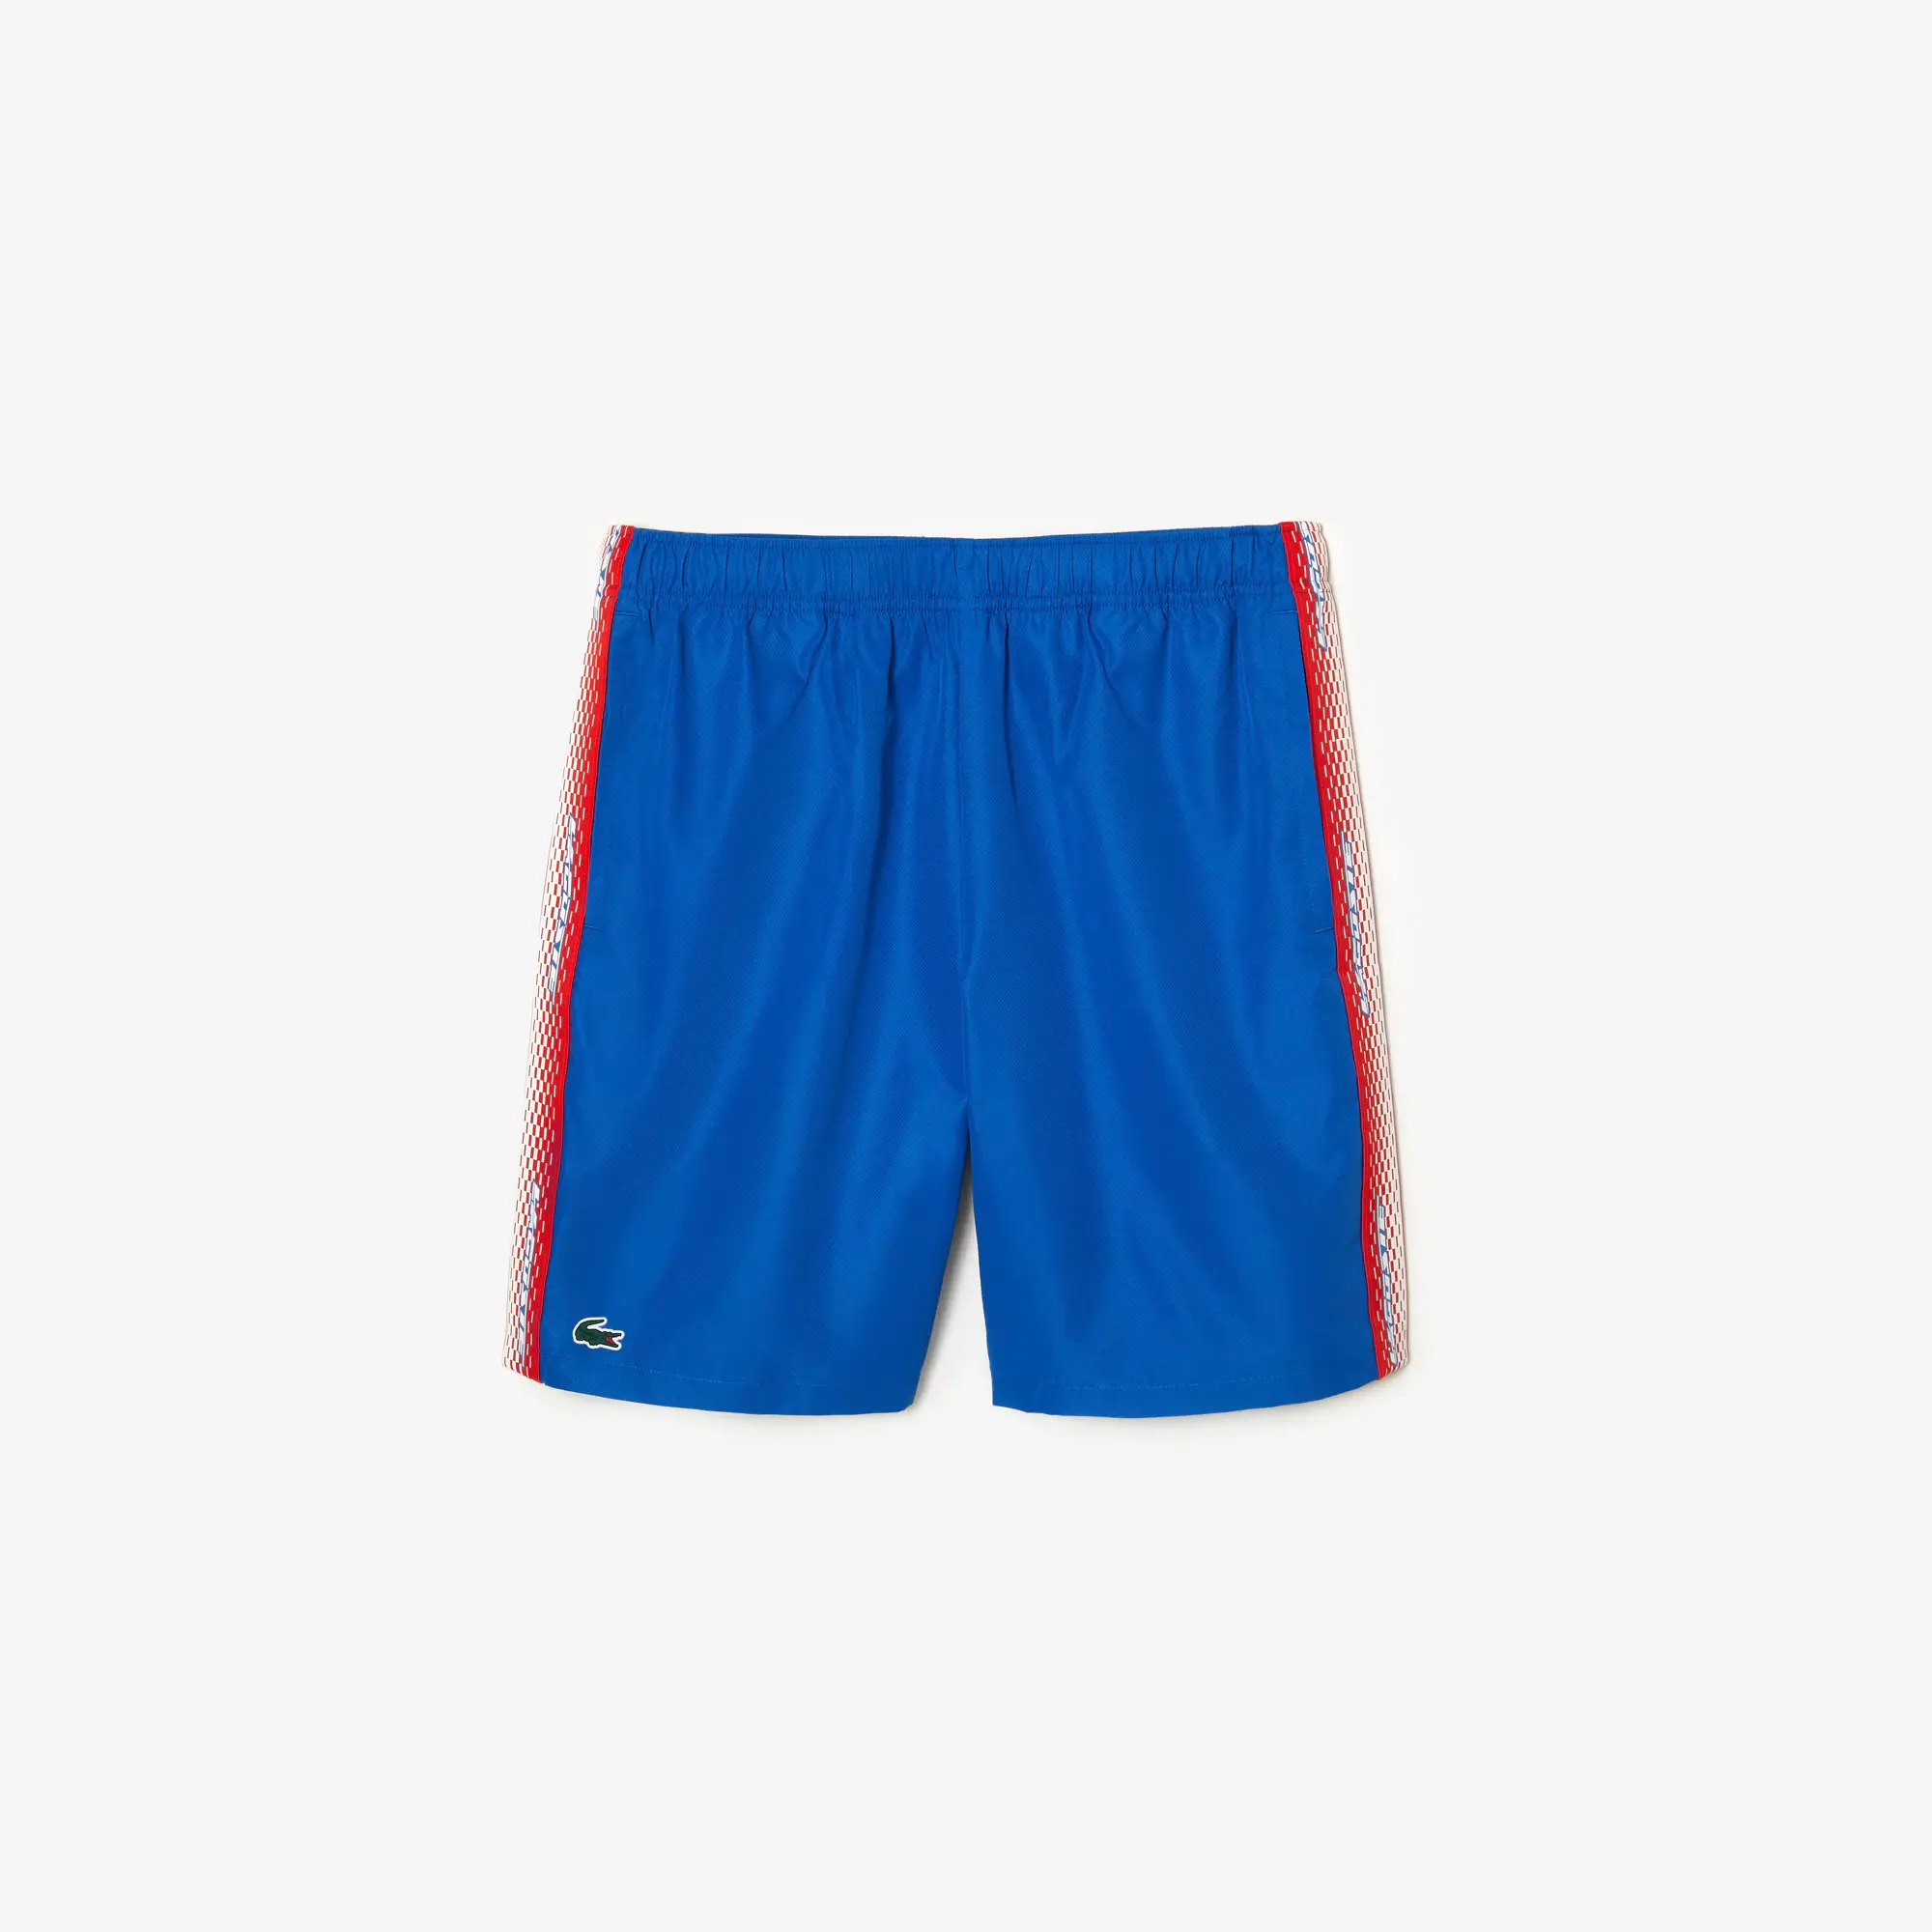 Lacoste Men’s Recycled Polyester Tennis Shorts. 2